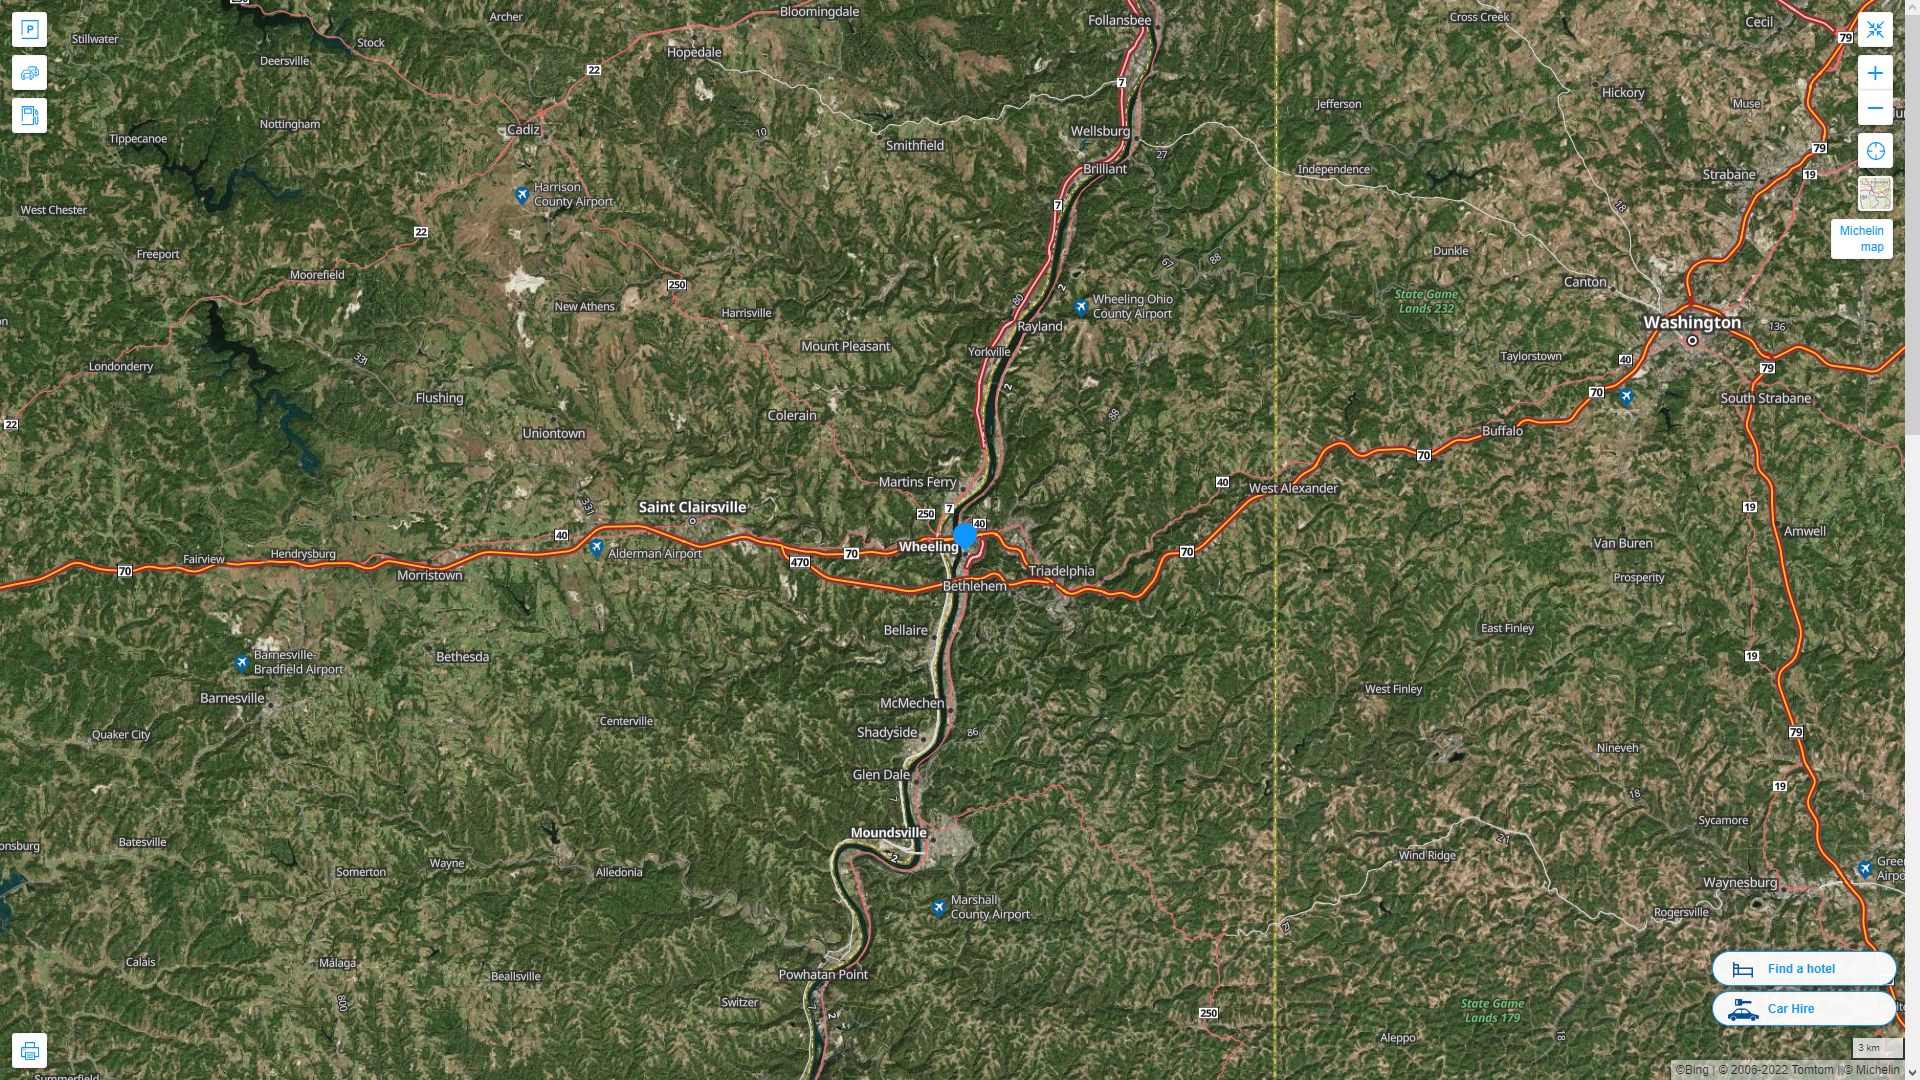 Wheeling West Virginia Highway and Road Map with Satellite View